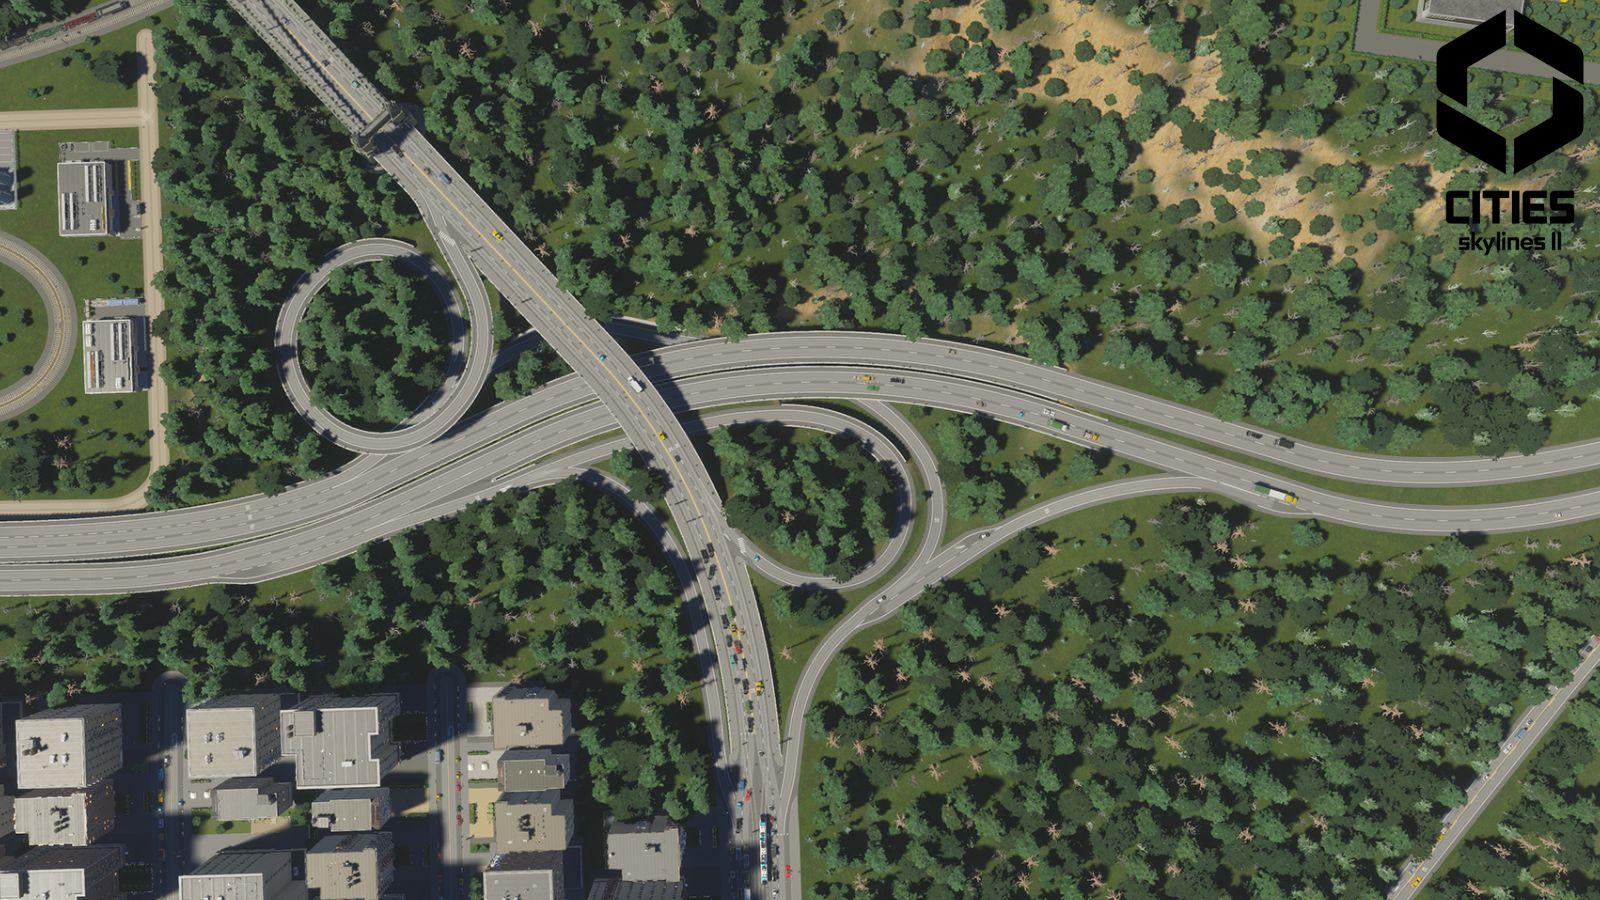 Cities Skylines road direction